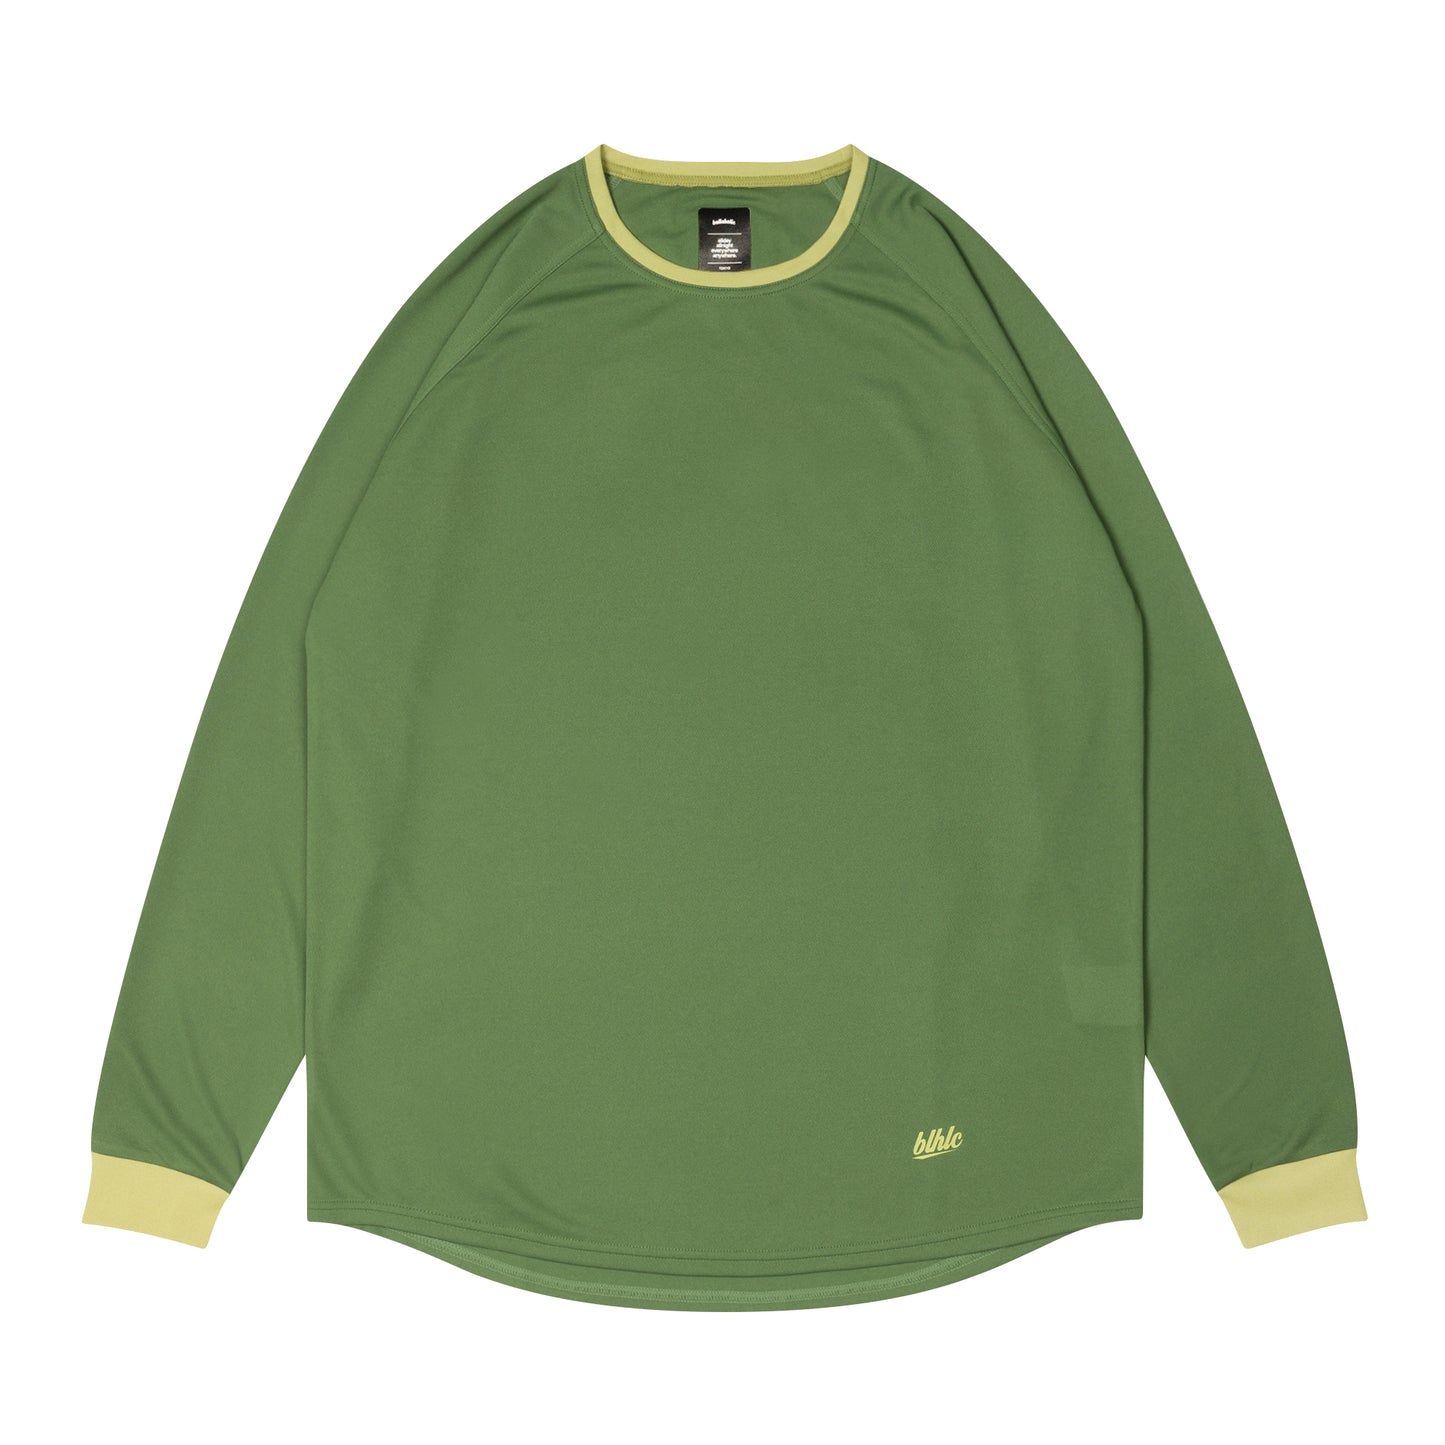 blhlc Cool Long Tee (olive)